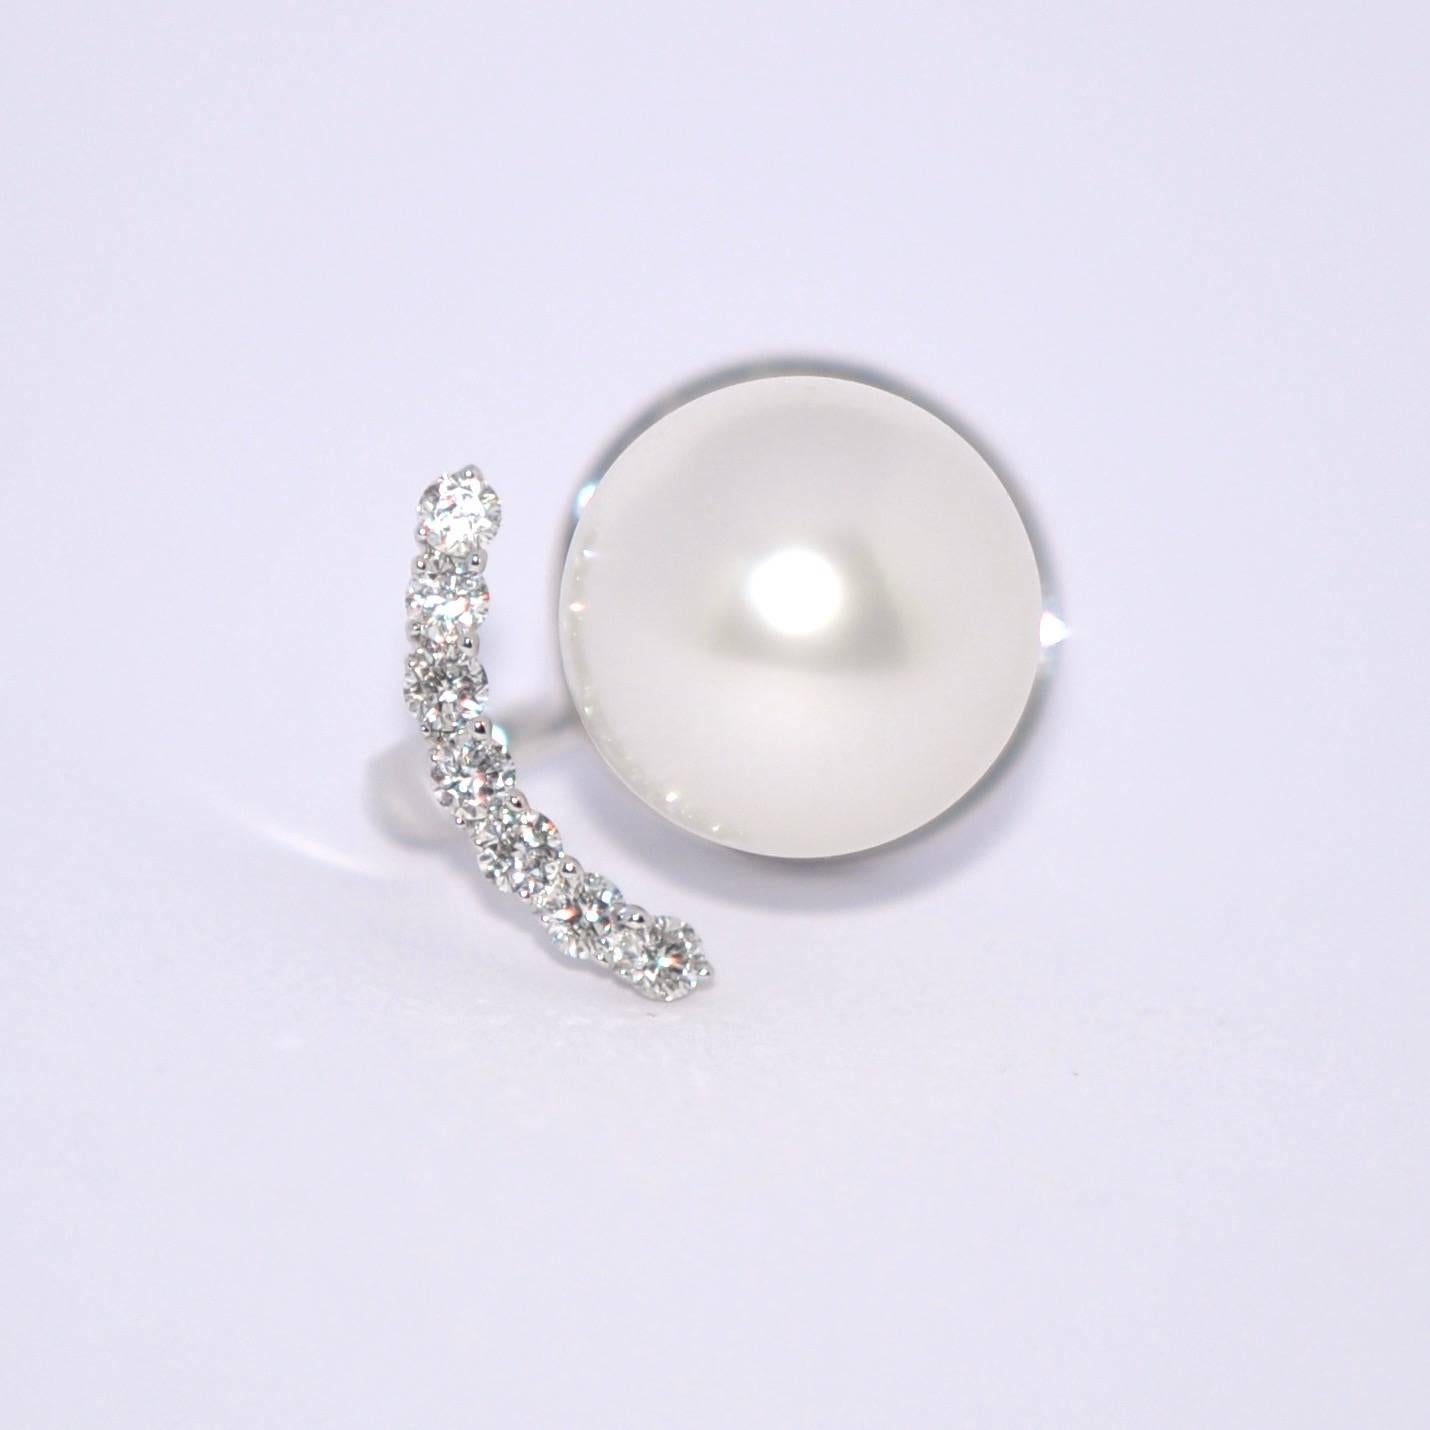 Discover this White South Sea Pearl 10-11 mm Diamonds G/VS ct 0.43 18K White Gold Earrings.
South Sea pearls require no artificial treatments or colouring before being put onto the market. By virtue of such prestige and beauty they are considered